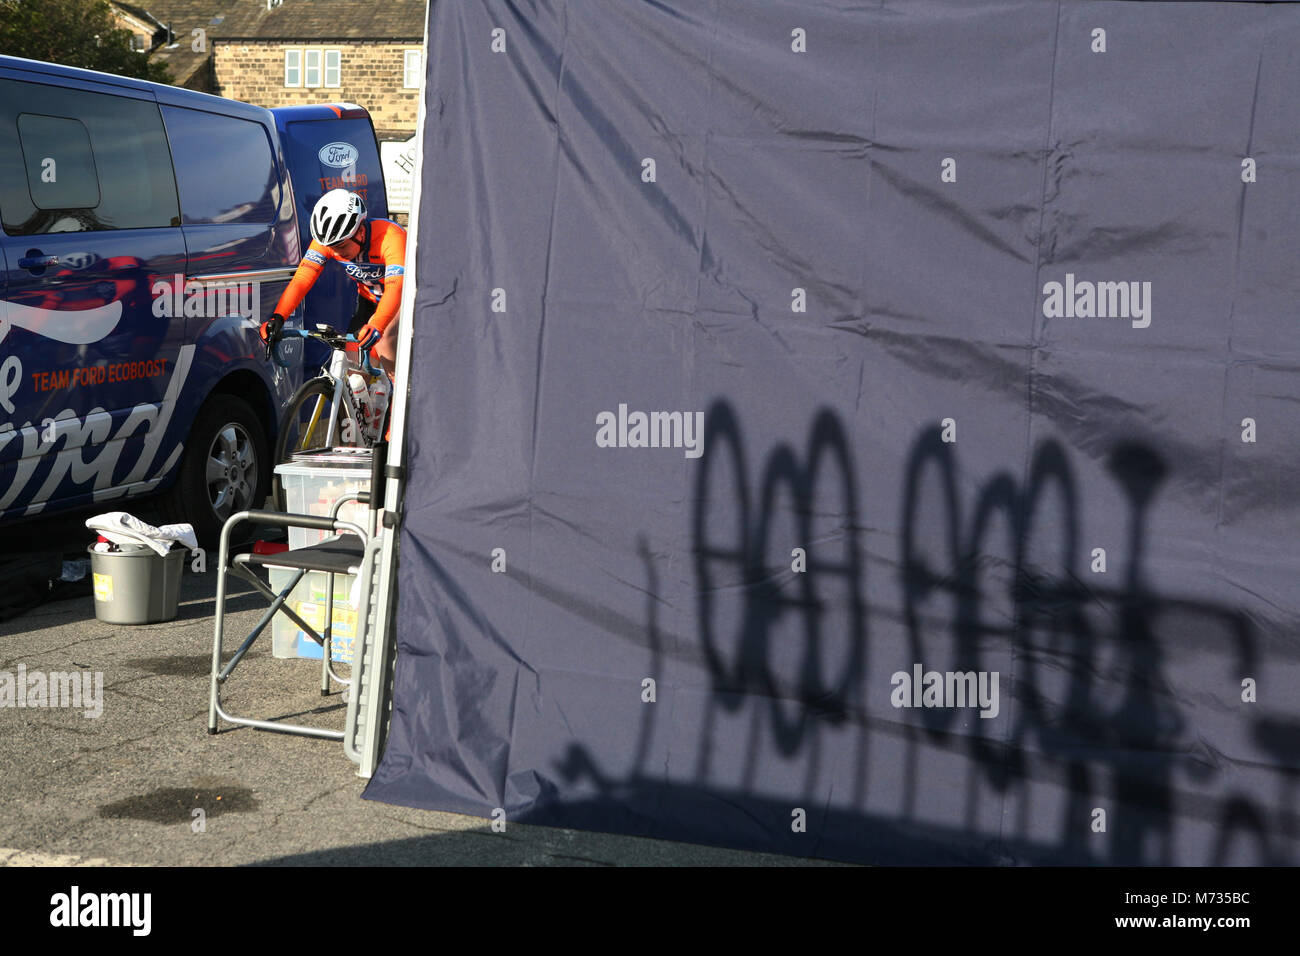 Tour de Yorkshire 2016. Final preparations by Team Ford prior to the start of the womens race at the tour de yorkshire, Otley. Stock Photo